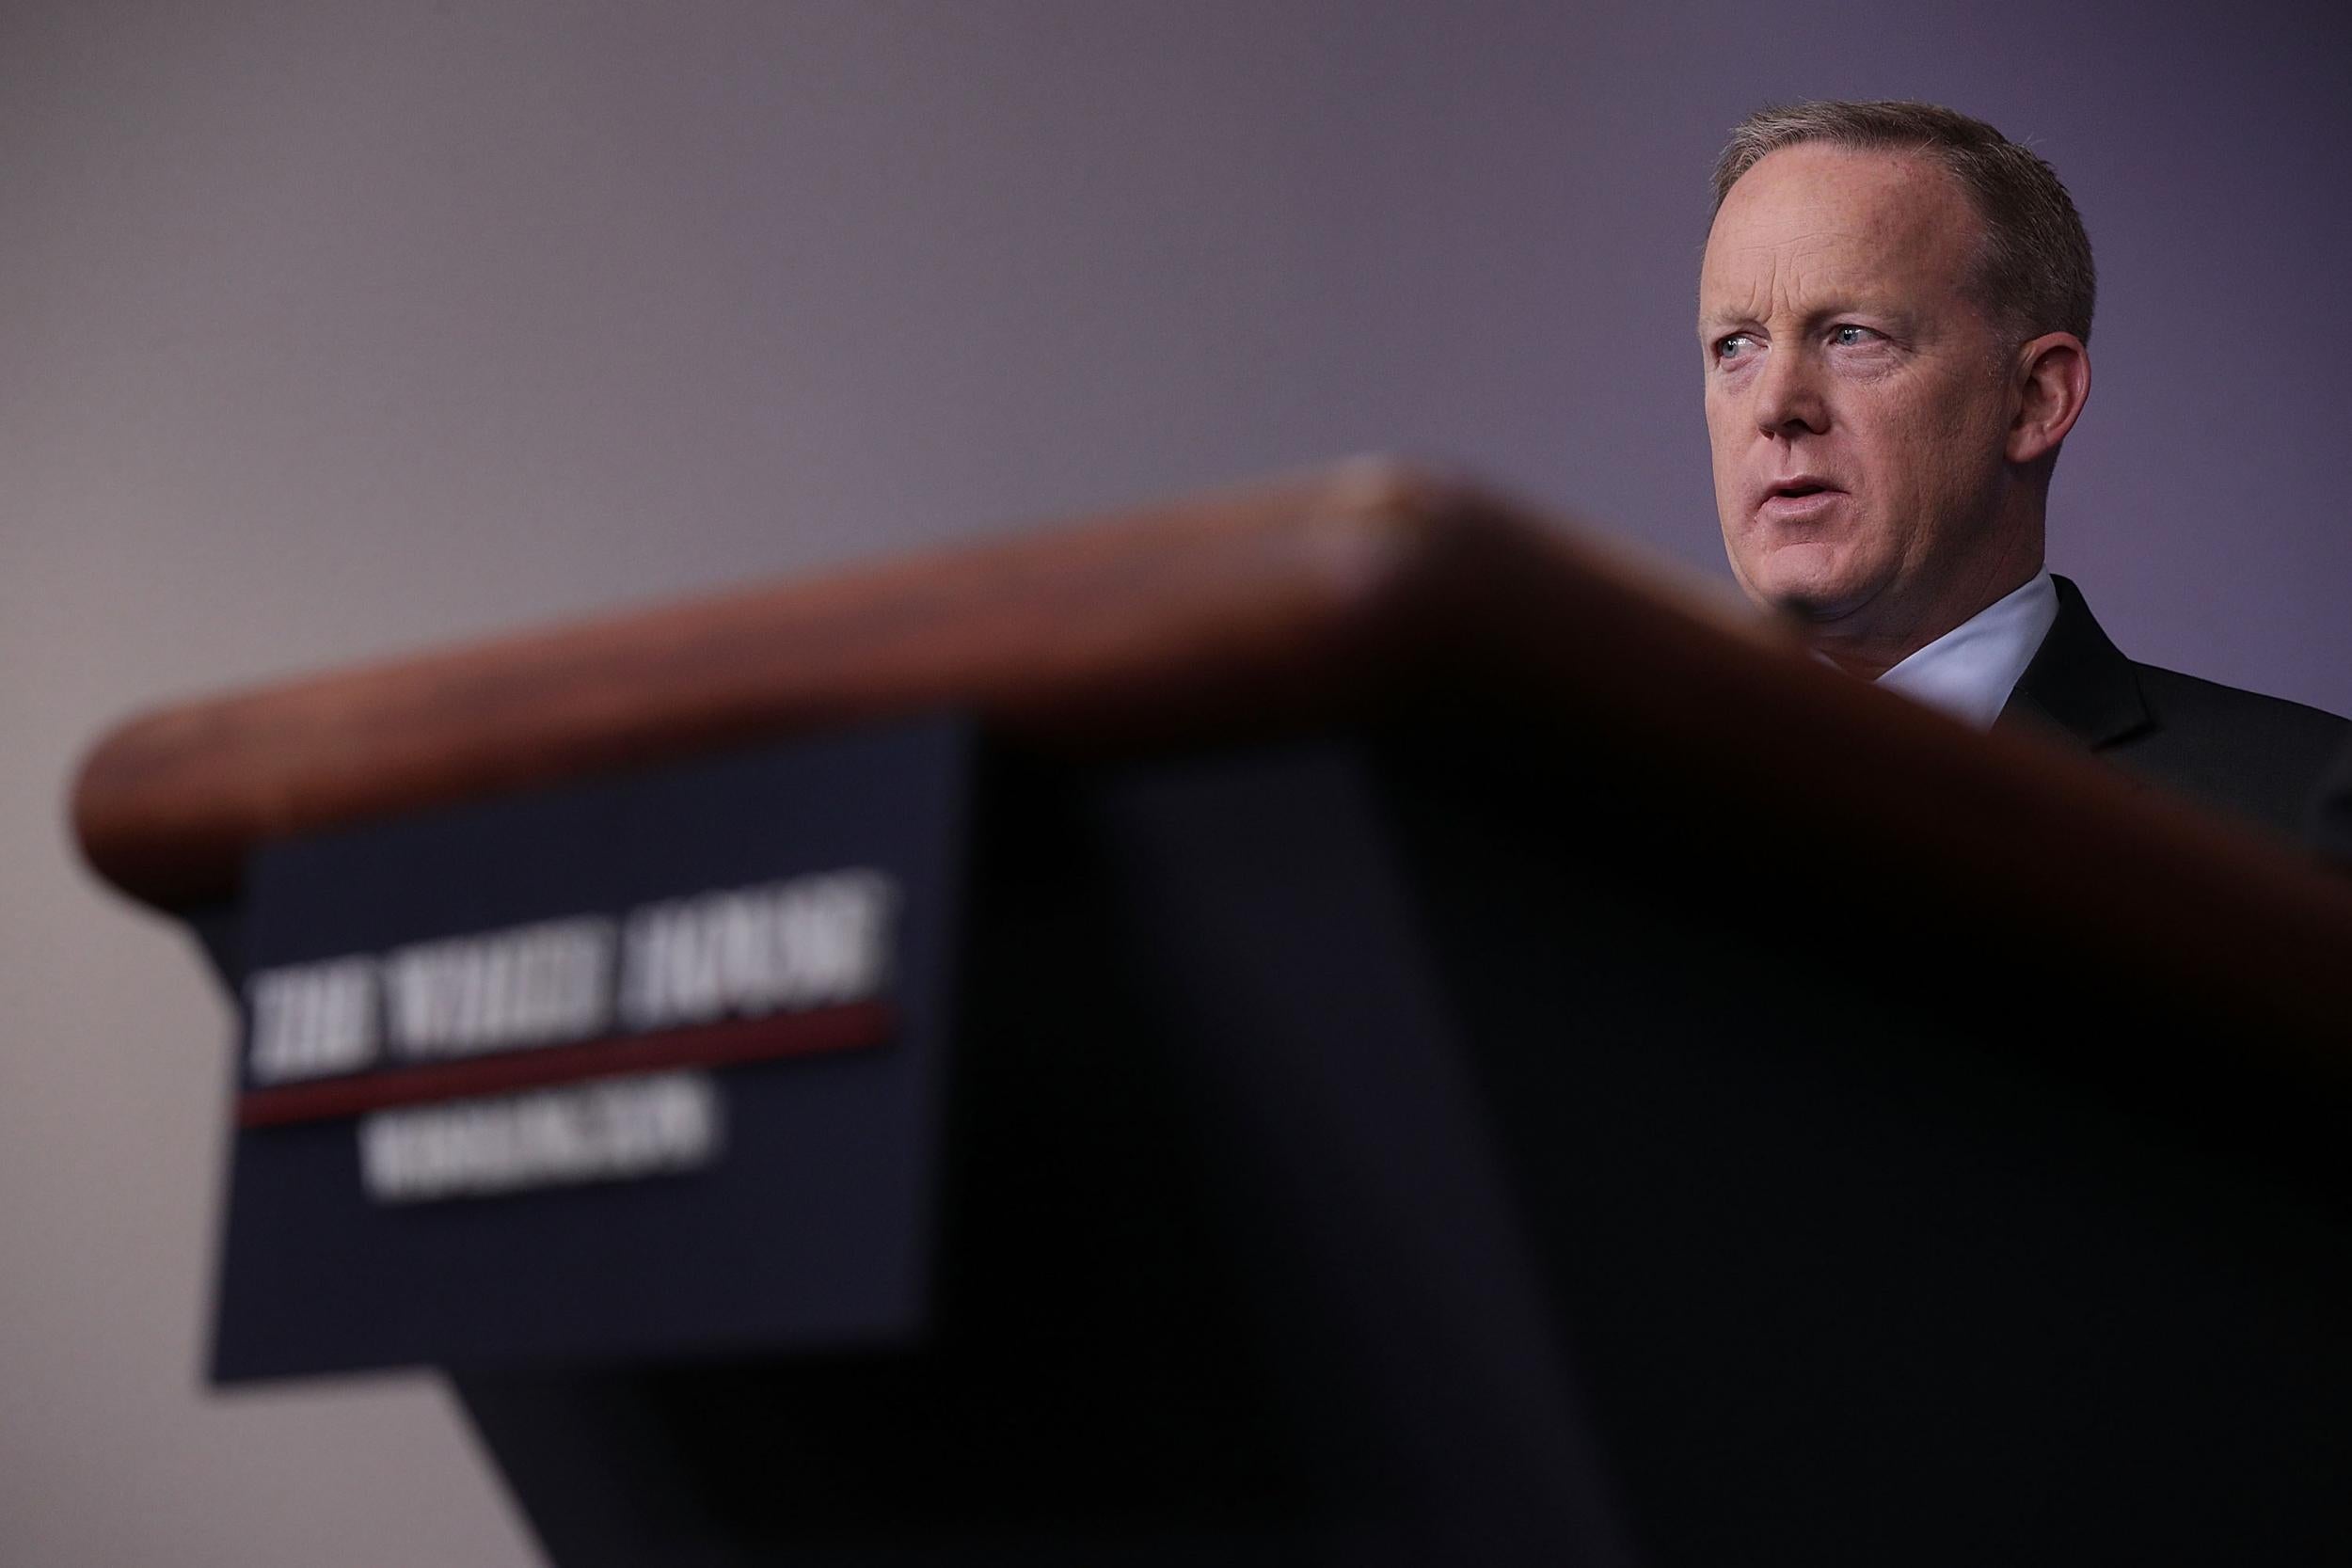 Spicer didn't take a single question from the White House press corps